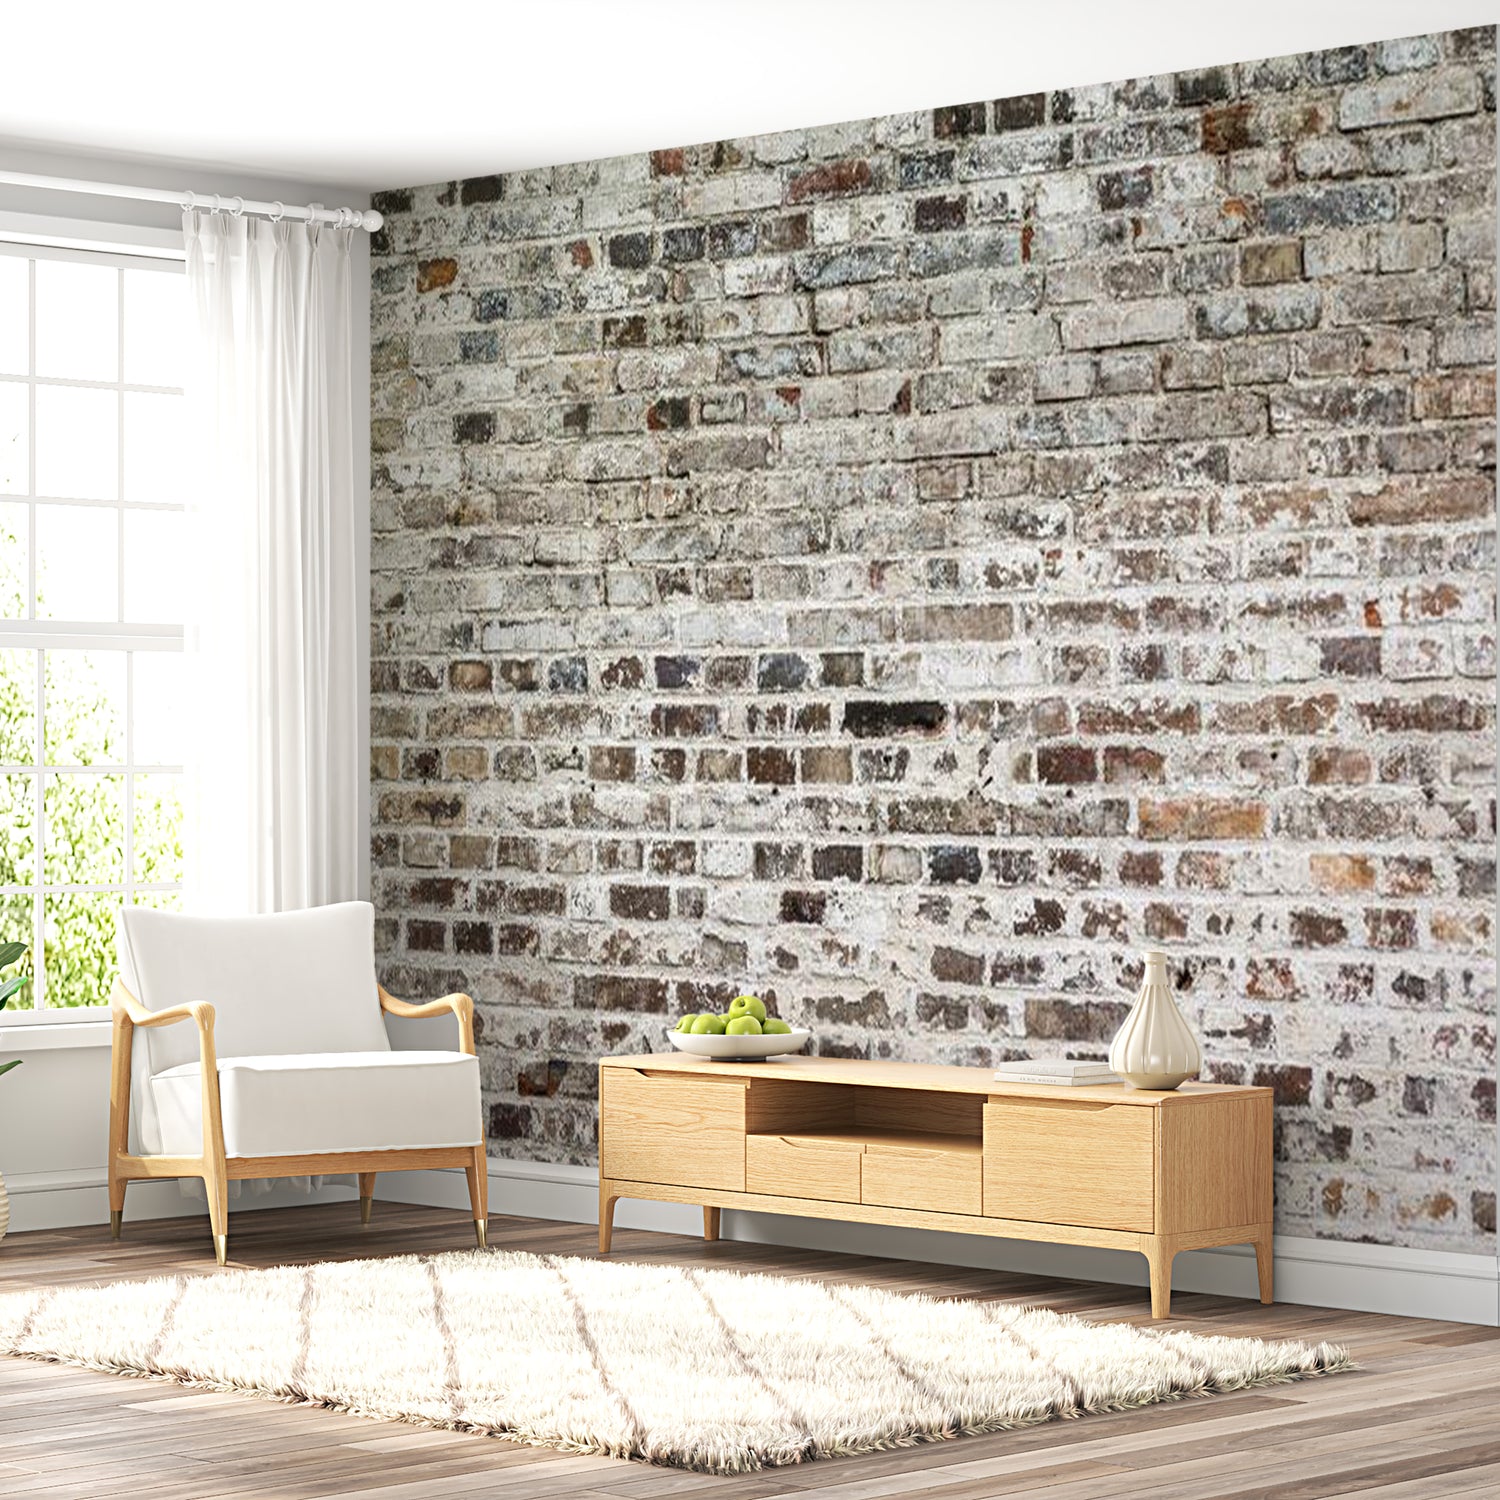 Peel & Stick XXL Wall Mural - Weathered Old Brick Wall - Removable Wall Decals